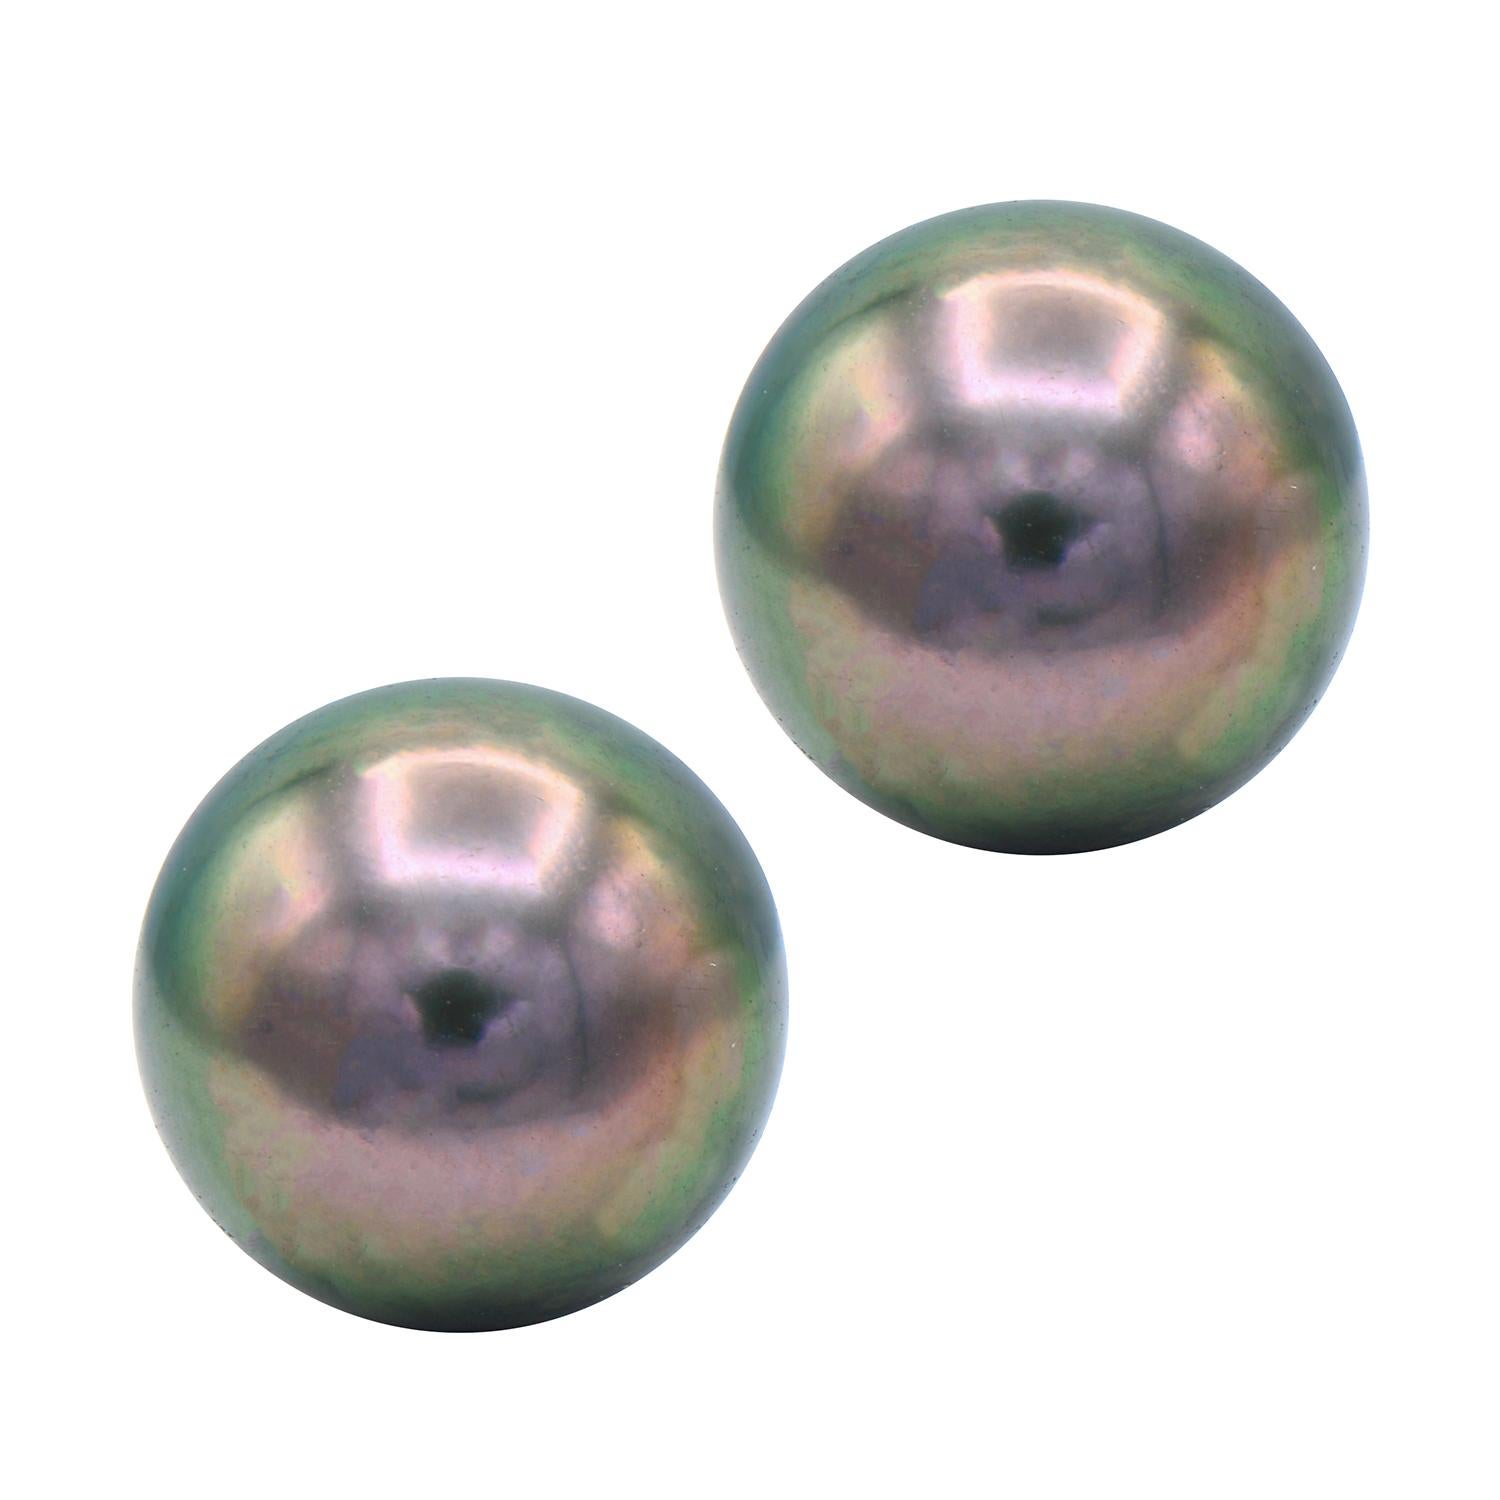 Tahitian Pearl Studs give a little twist to the classic white pearl studs. The Tahitian Pearl Studs are expertly matched in color, luster, and size to make a perfect pair. These 11.5-12mm beautiful pearls are set in 14 karat white gold.